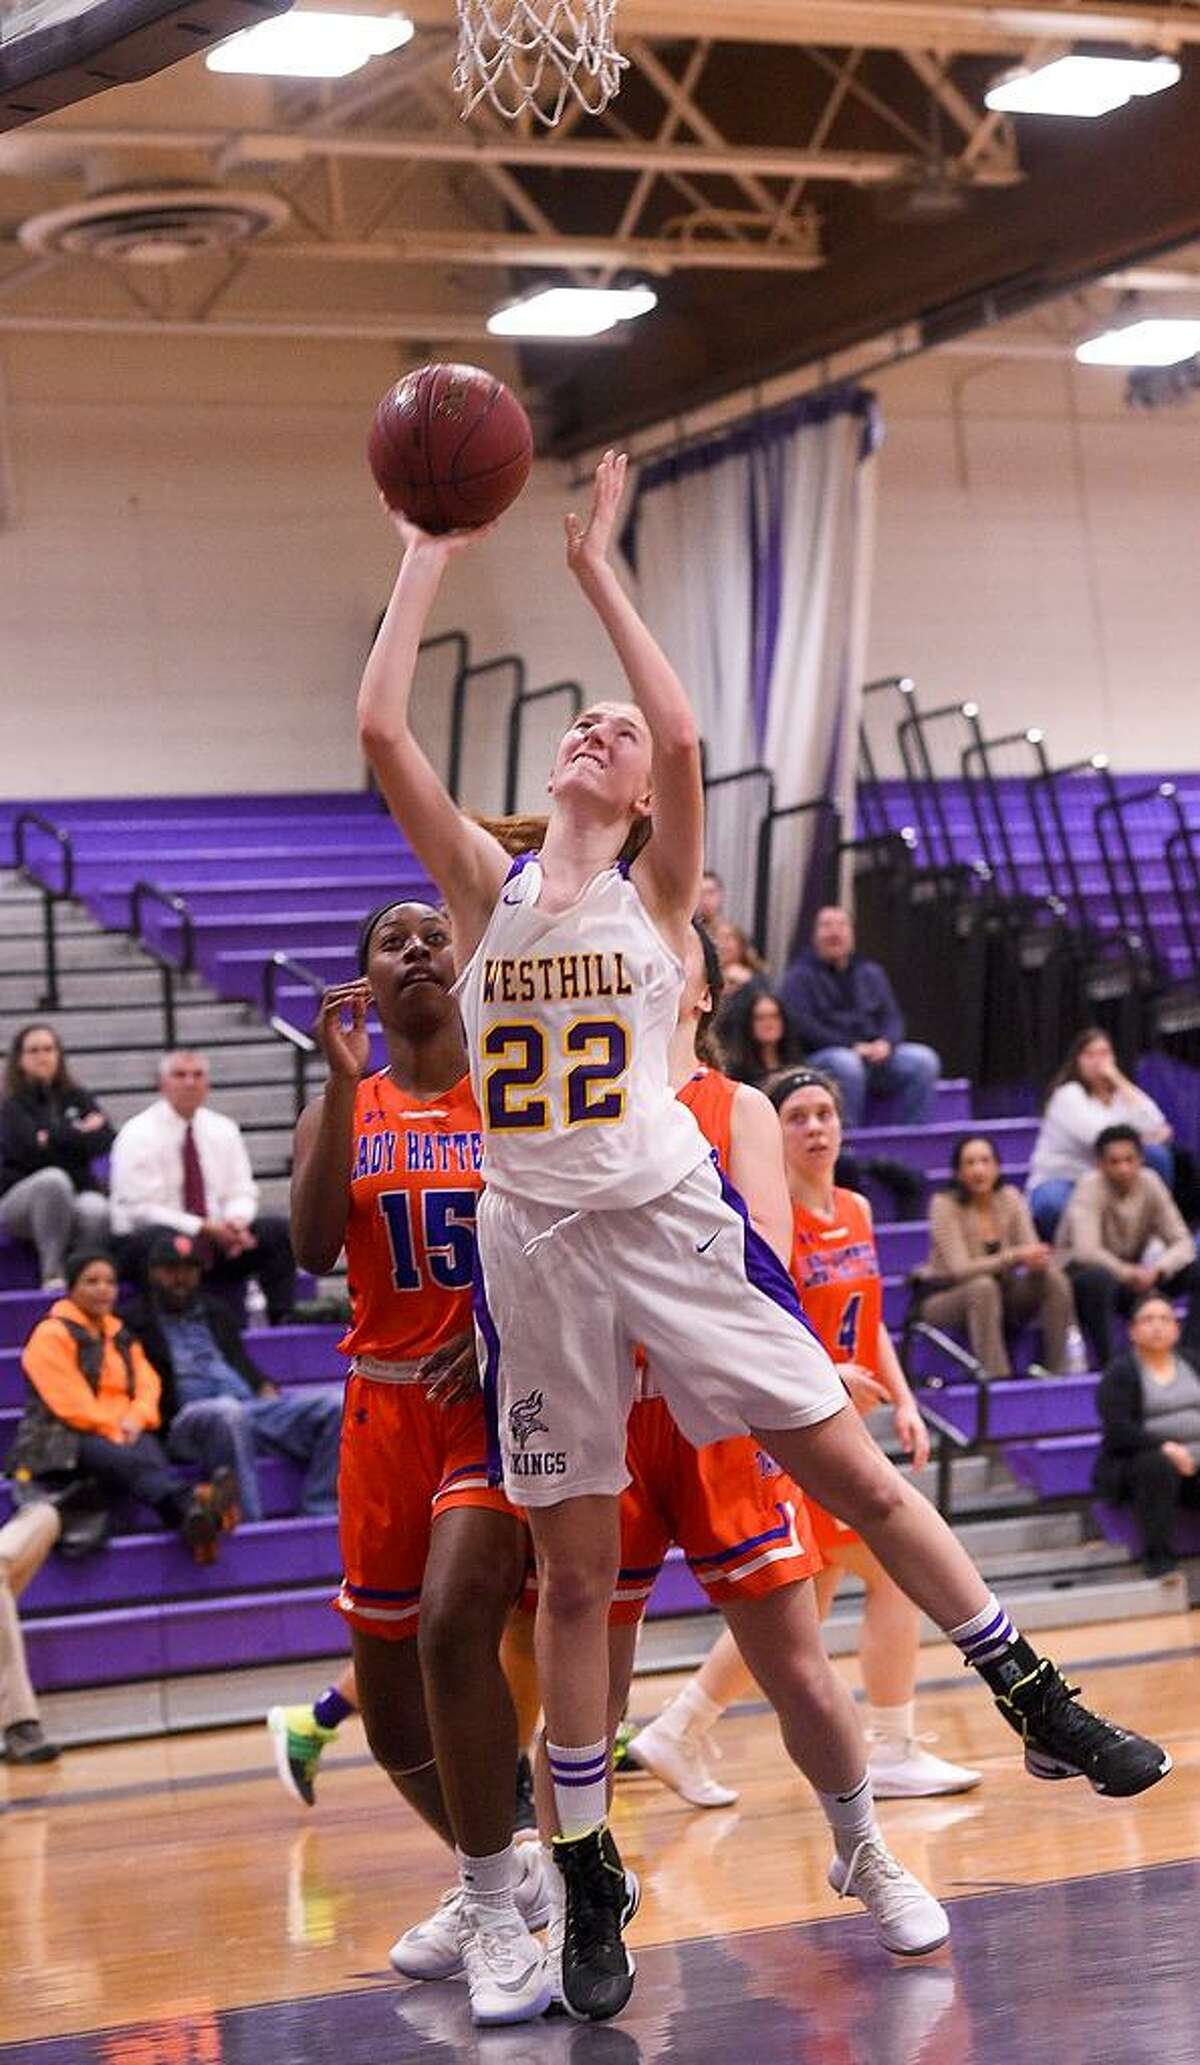 Westhill’s Grace Hansen (22) shoots against Danbury’s Tanisha Cunningham (15) during an FCIAC girls basketball game at Westhill High School in Stamford on Jan. 11, 2018. Hansen will forego basketball and soccer, but will play lacrosse at UMass-Lowell in the fall.